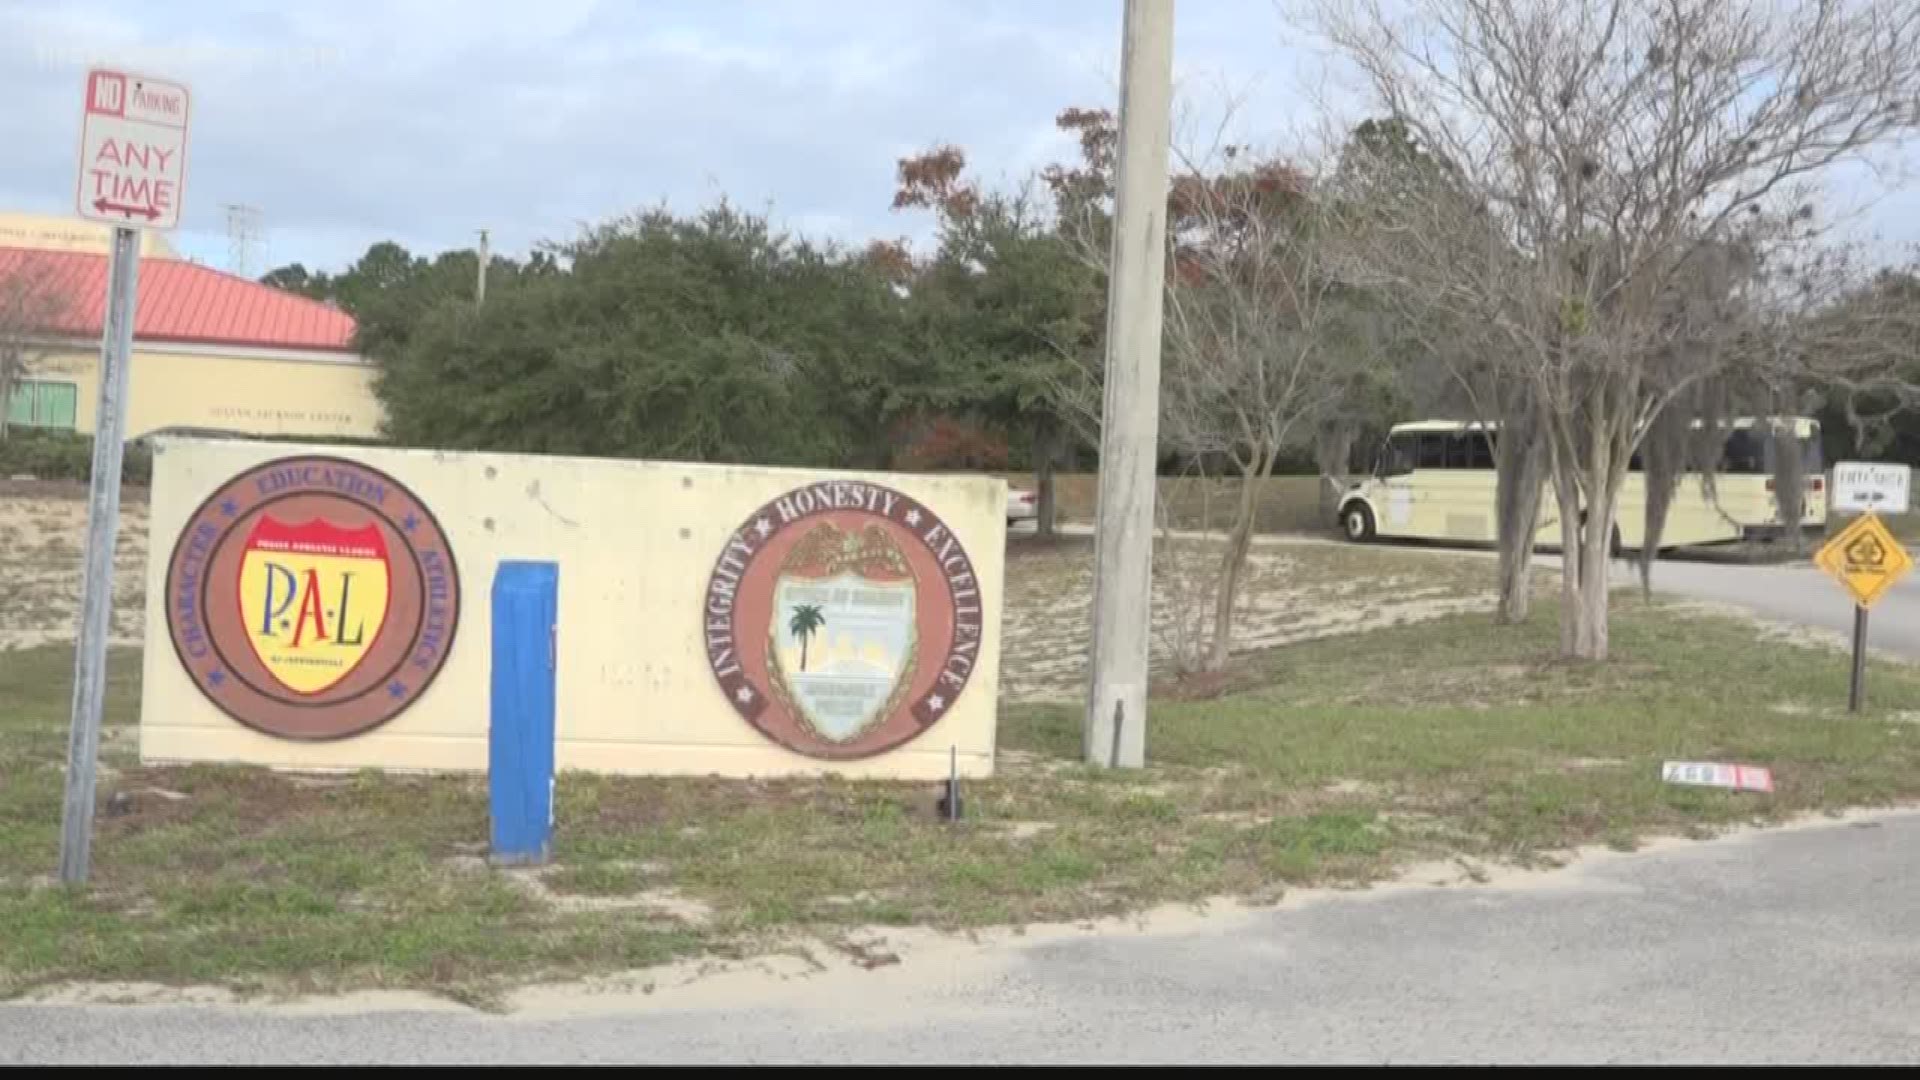 Members of the Jacksonville P.A.L. arrived at their facility Friday to find a racial slur, curse words and obscene image spray-painted on one of their buses.